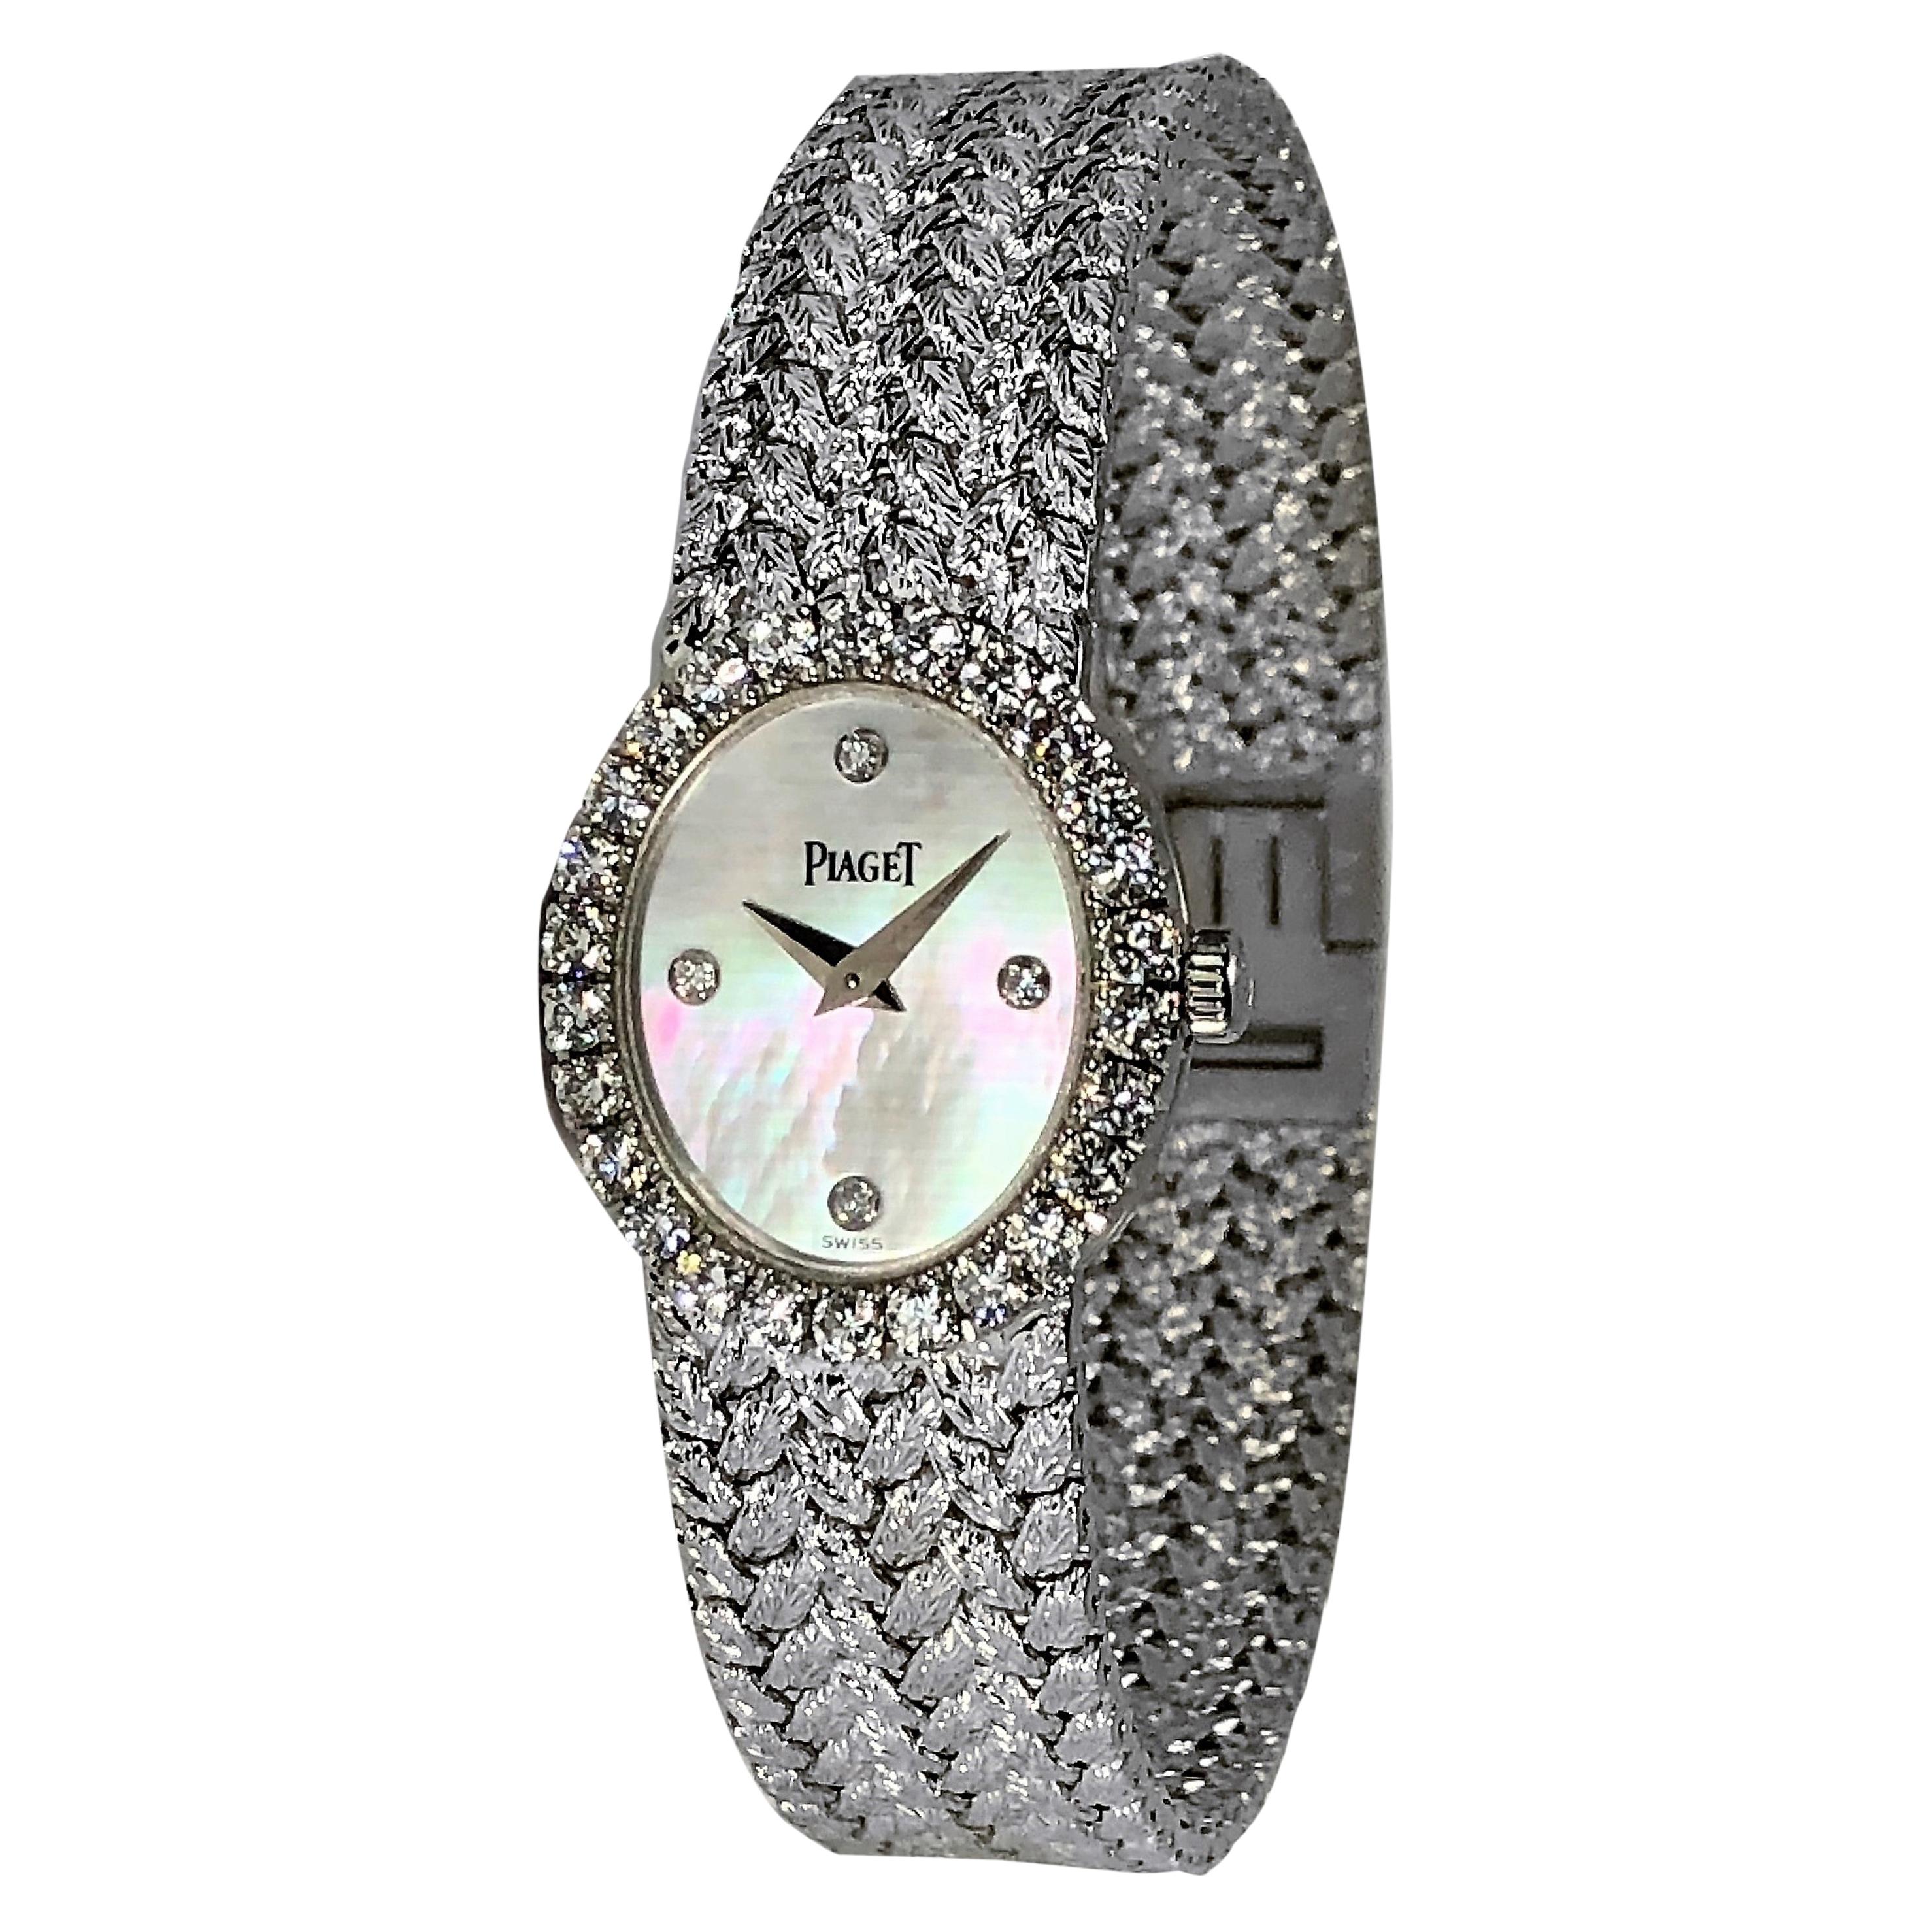 Ladies Piaget Petite Mother of Pearl Diamond Dial, White Gold Woven Band Watch